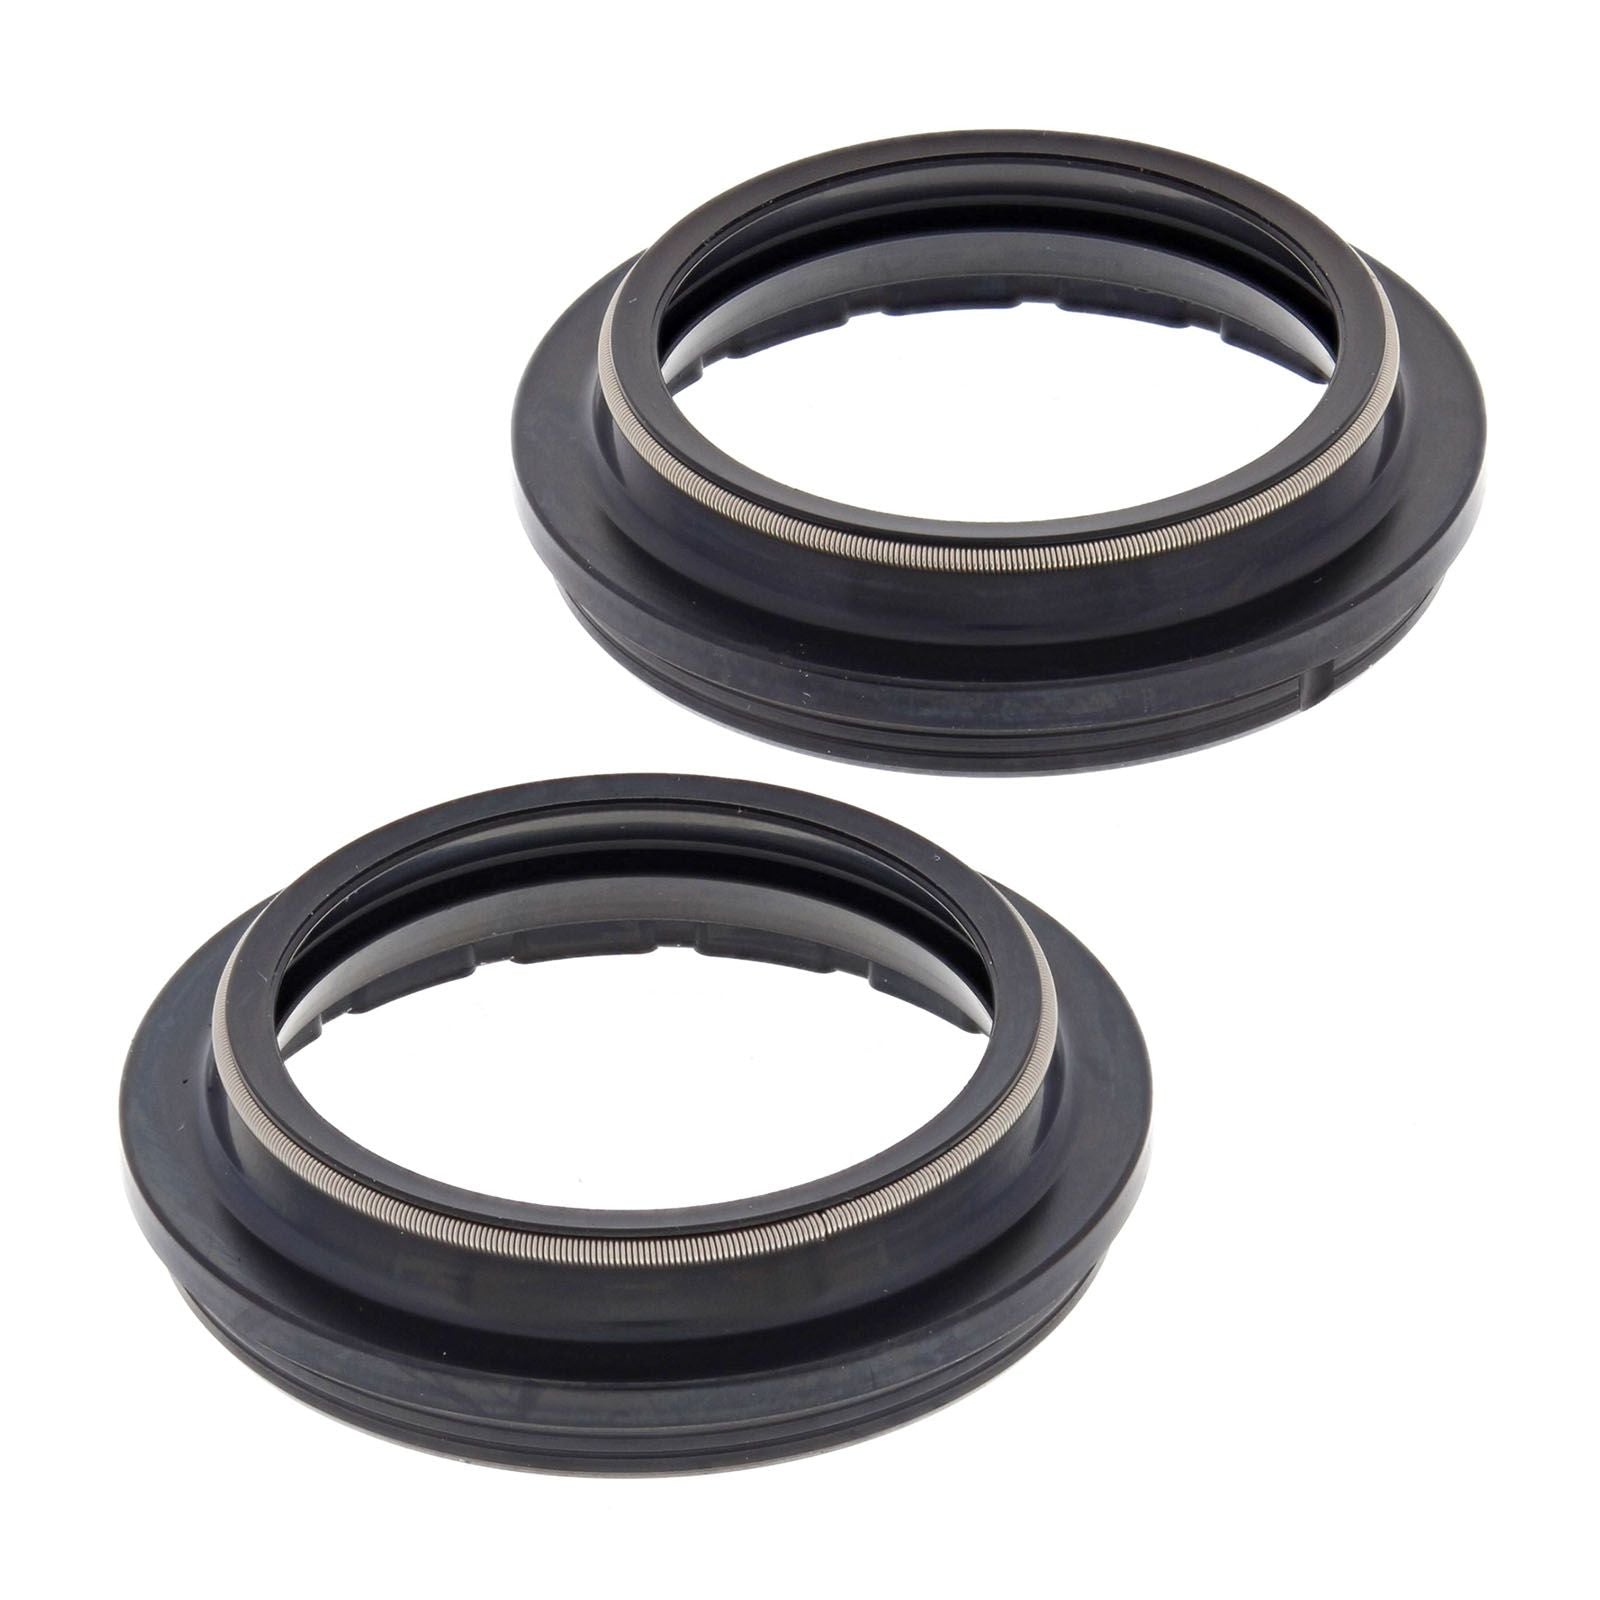 New ALL BALLS Racing Fork Dust Seal Kit #AB57148